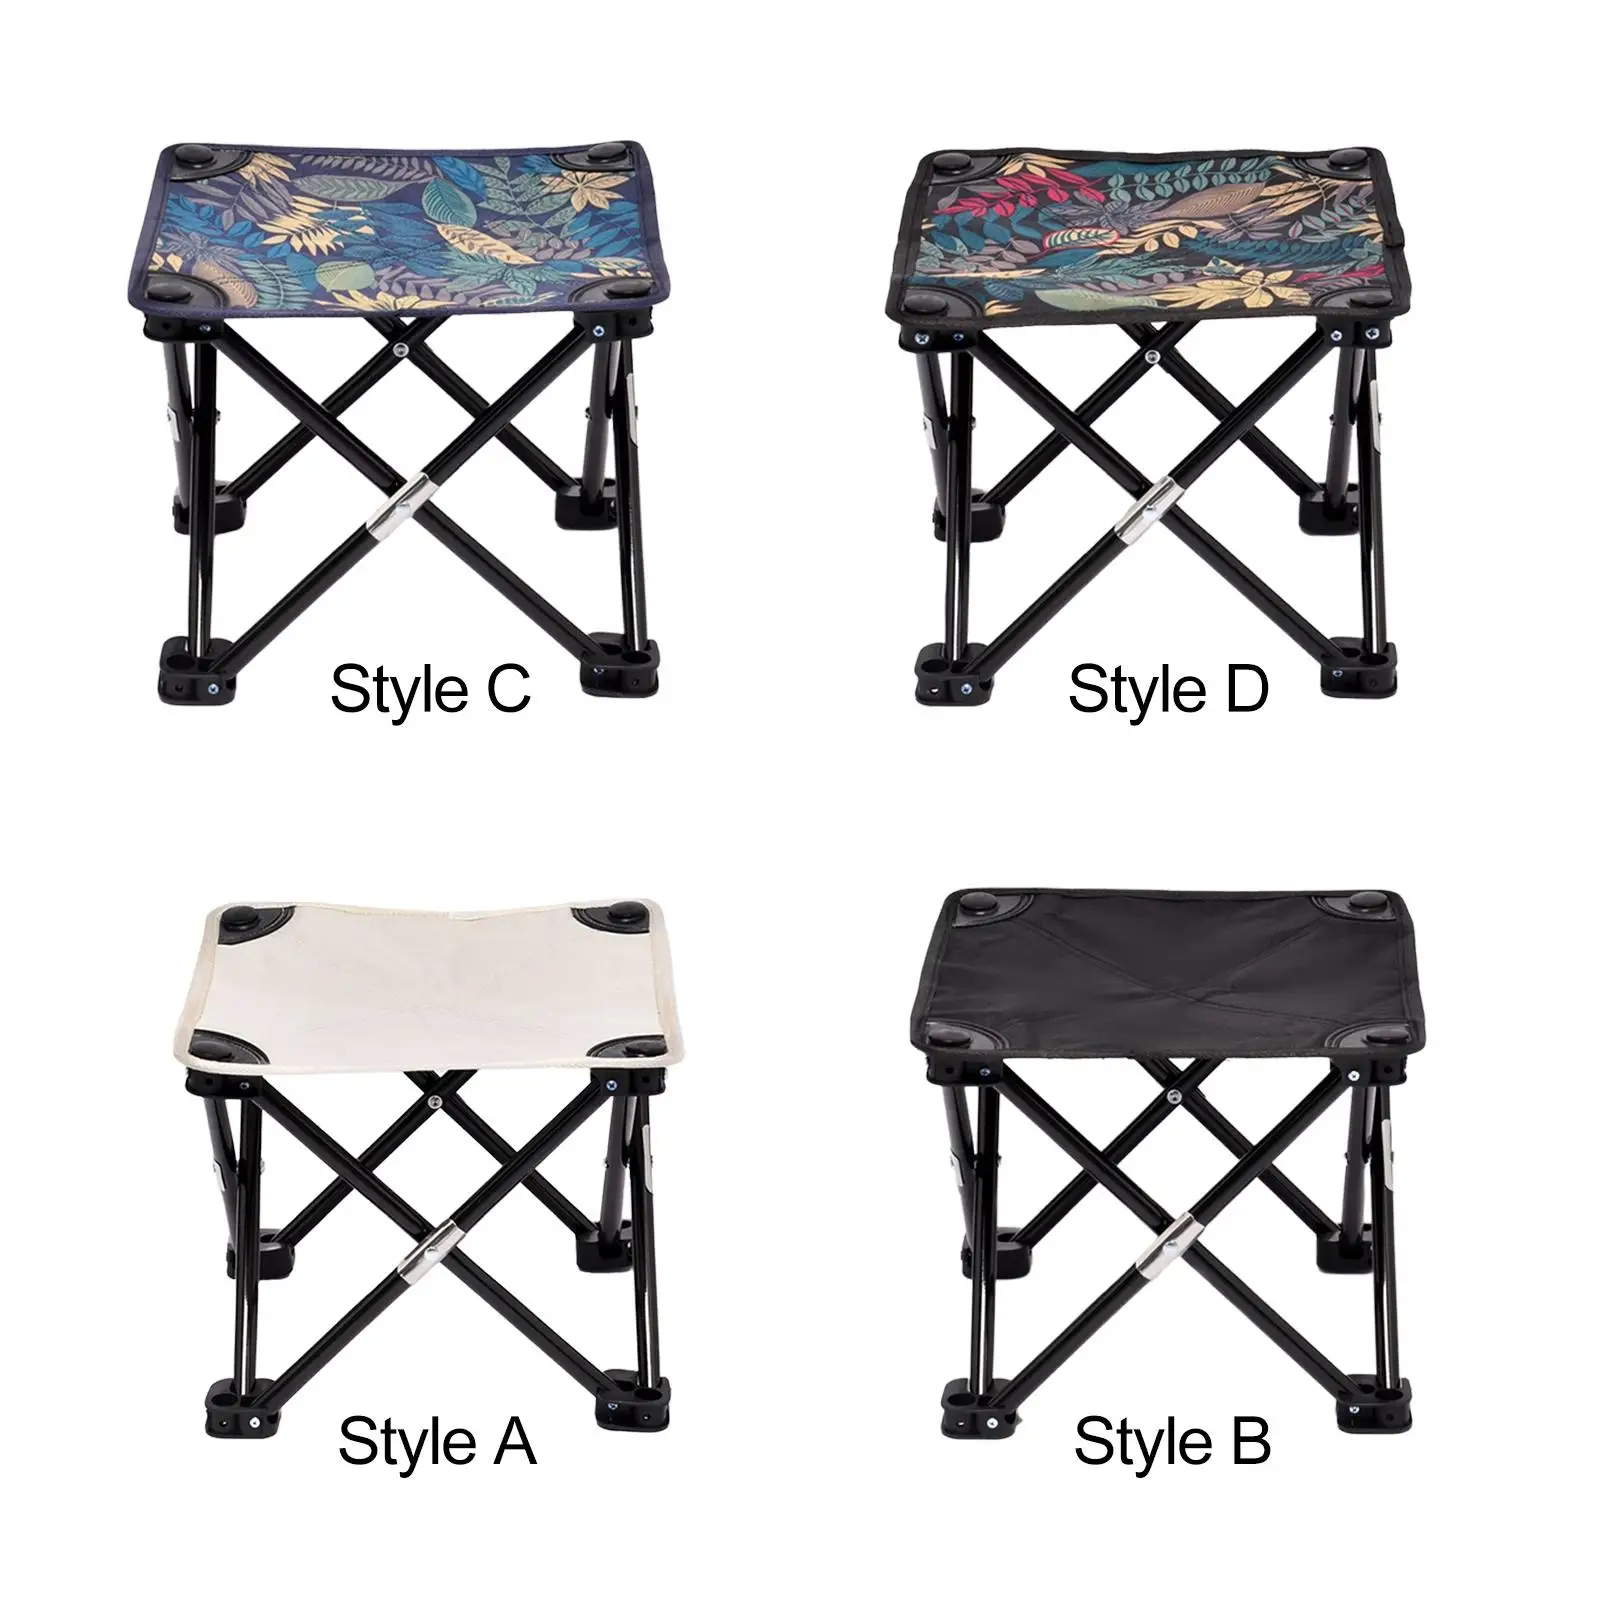 Folding Stool Reusable recliner Chair Ottoman Fishing Chairs Camp Stool for